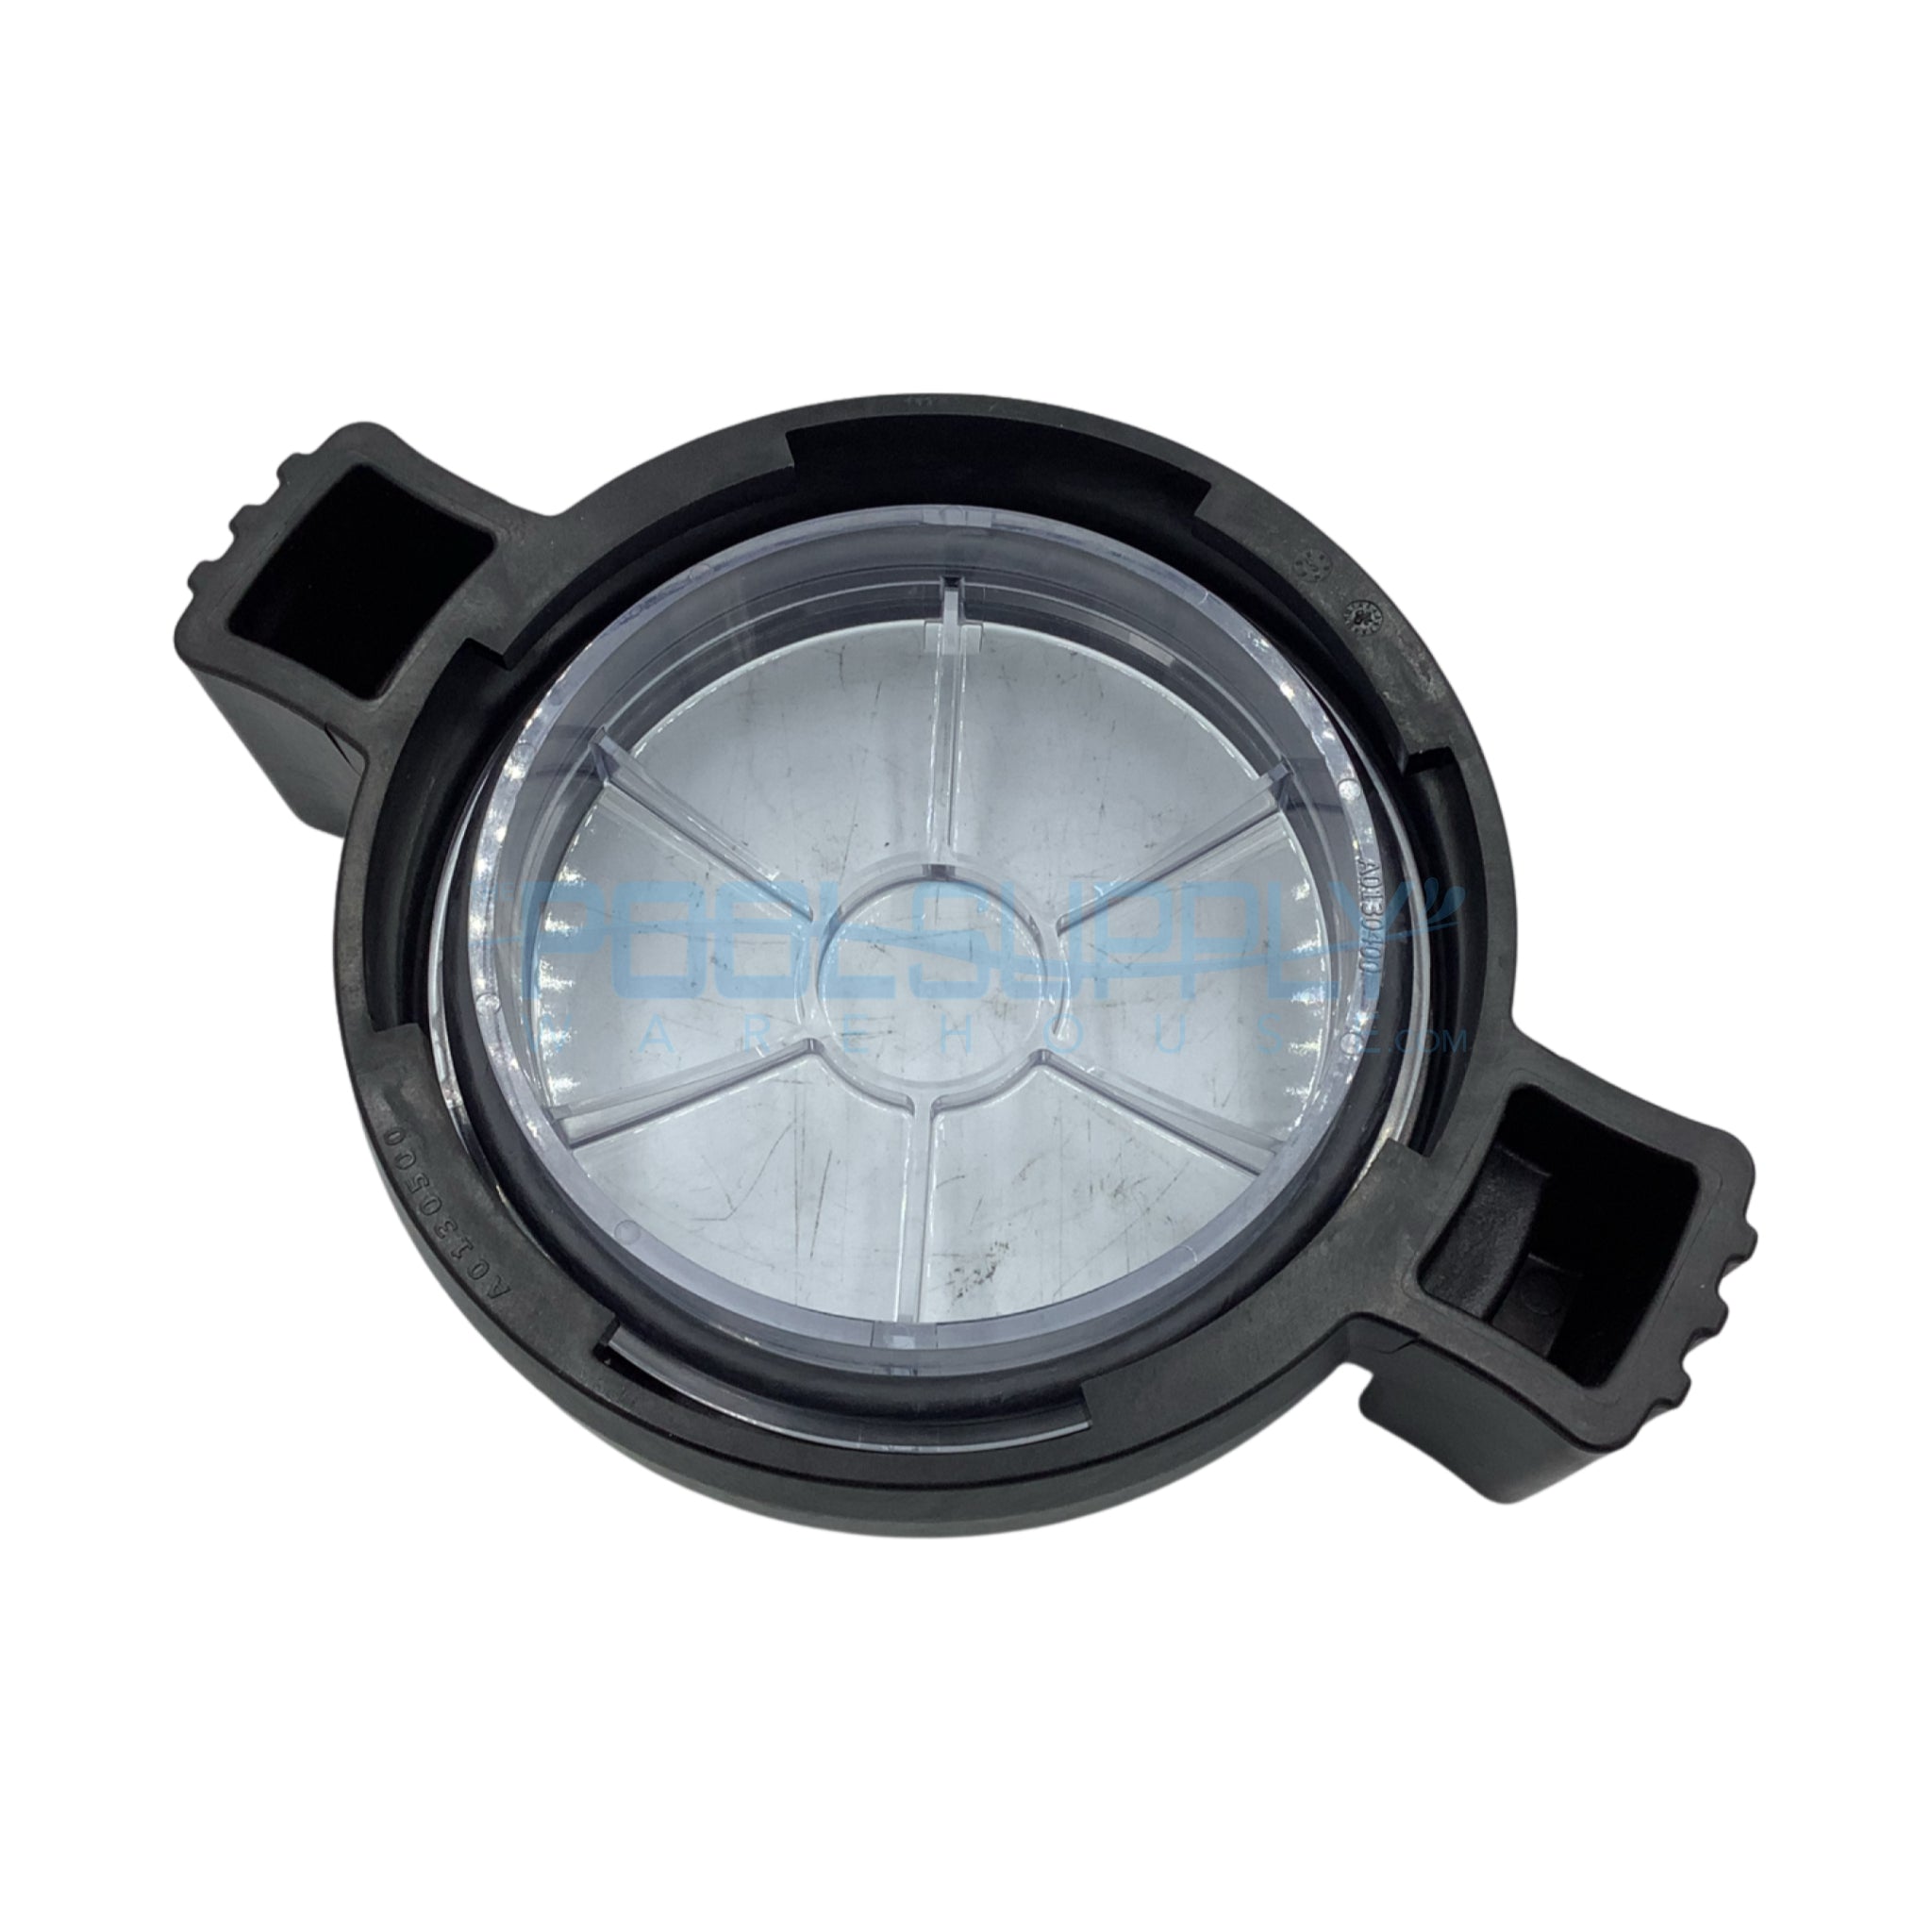 Zodiac Lid with Locking Ring Assembly - R0480000 - The Pool Supply Warehouse